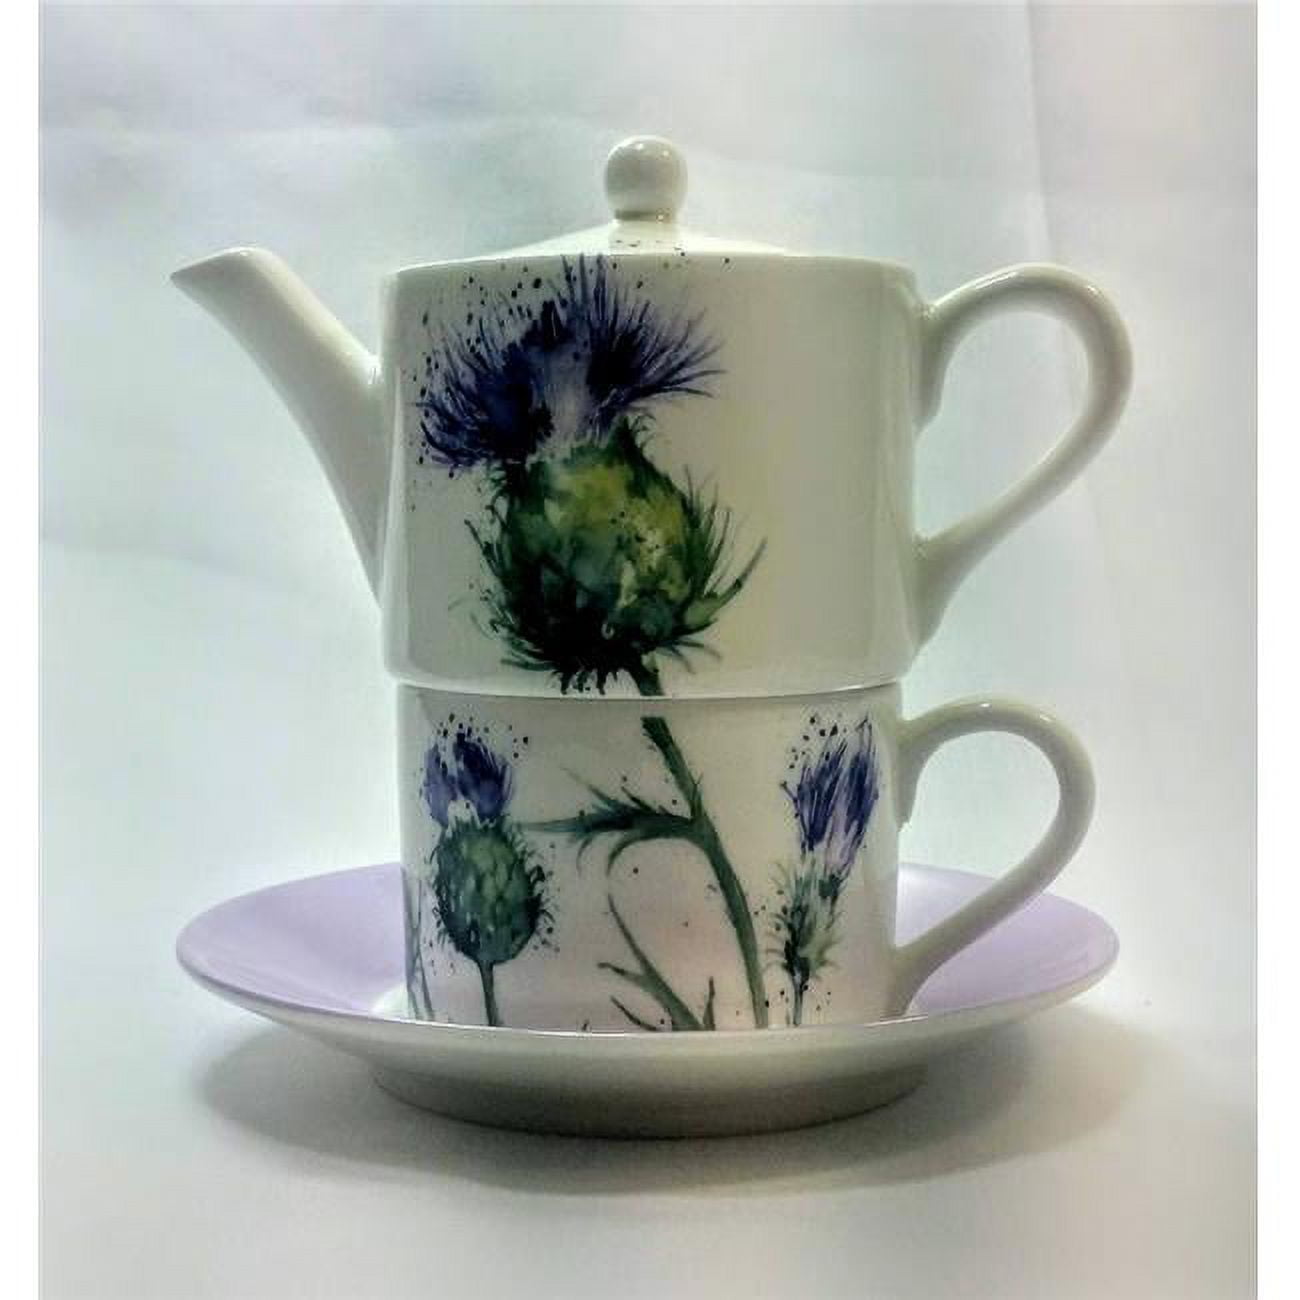 Er30143 90 Mm Thistles Tea For One Teapot With Tea Cup & Saucer, Multi Color